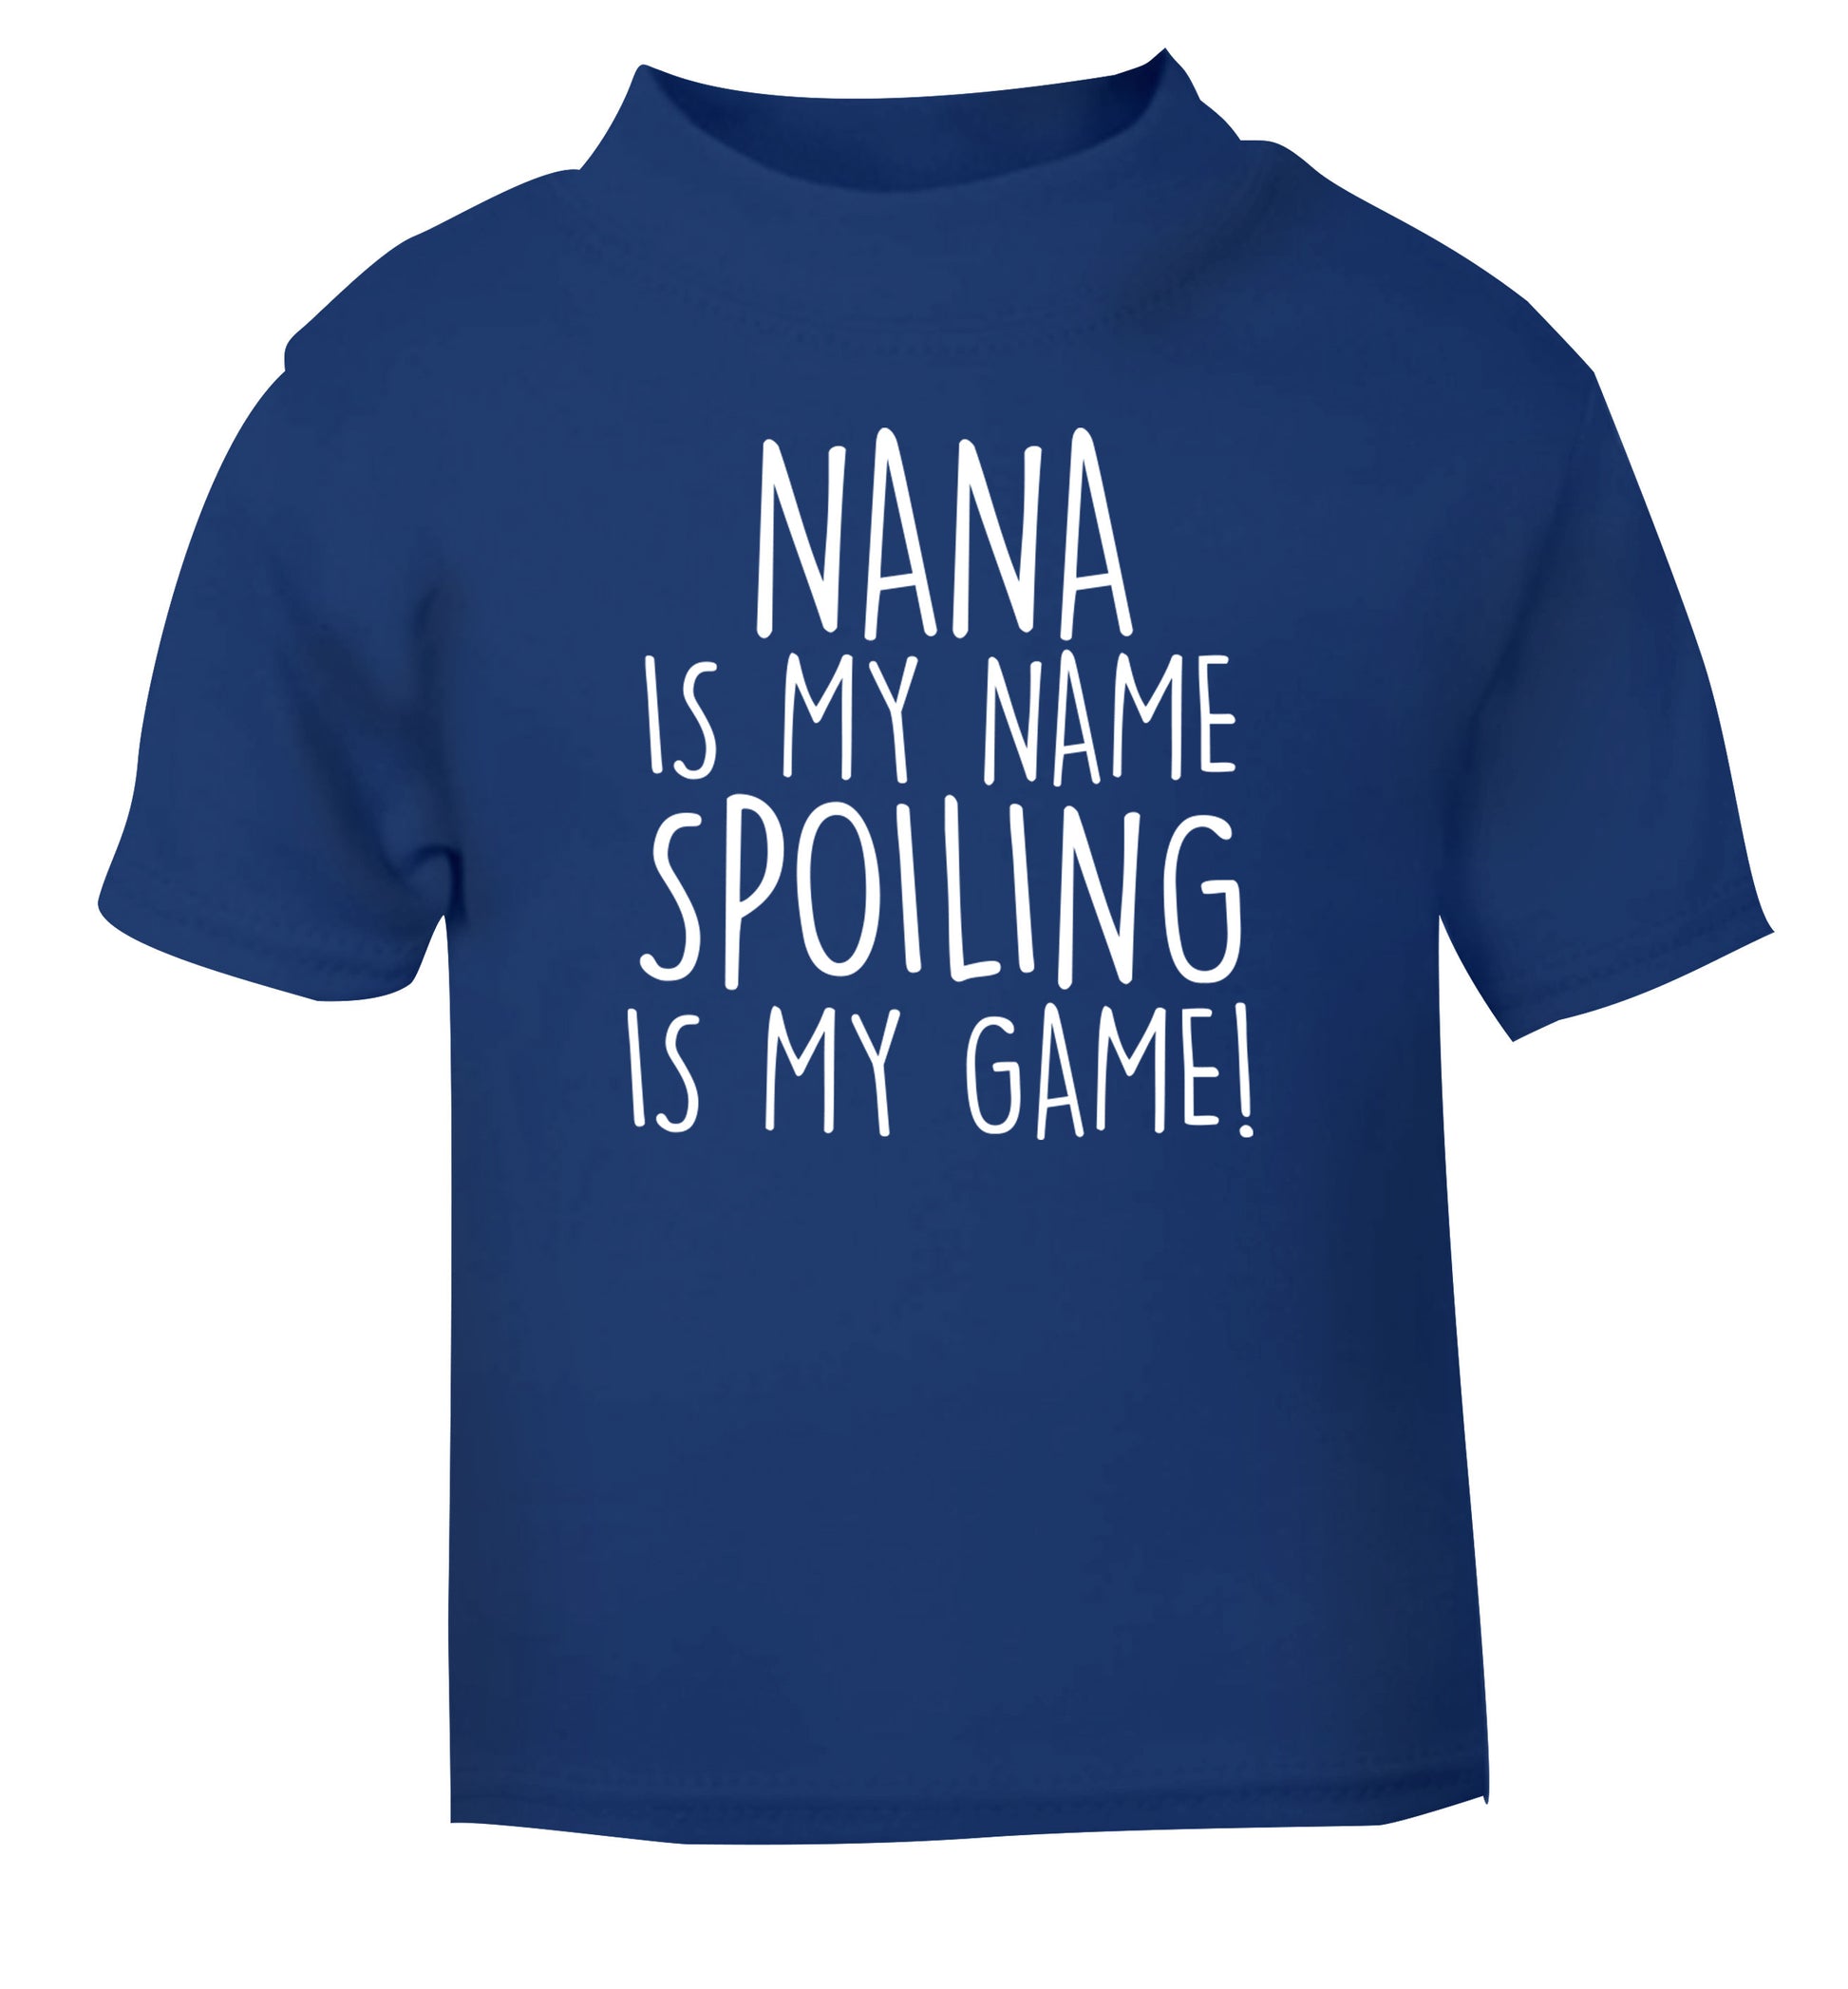 Nana is my name, spoiling is my game blue Baby Toddler Tshirt 2 Years